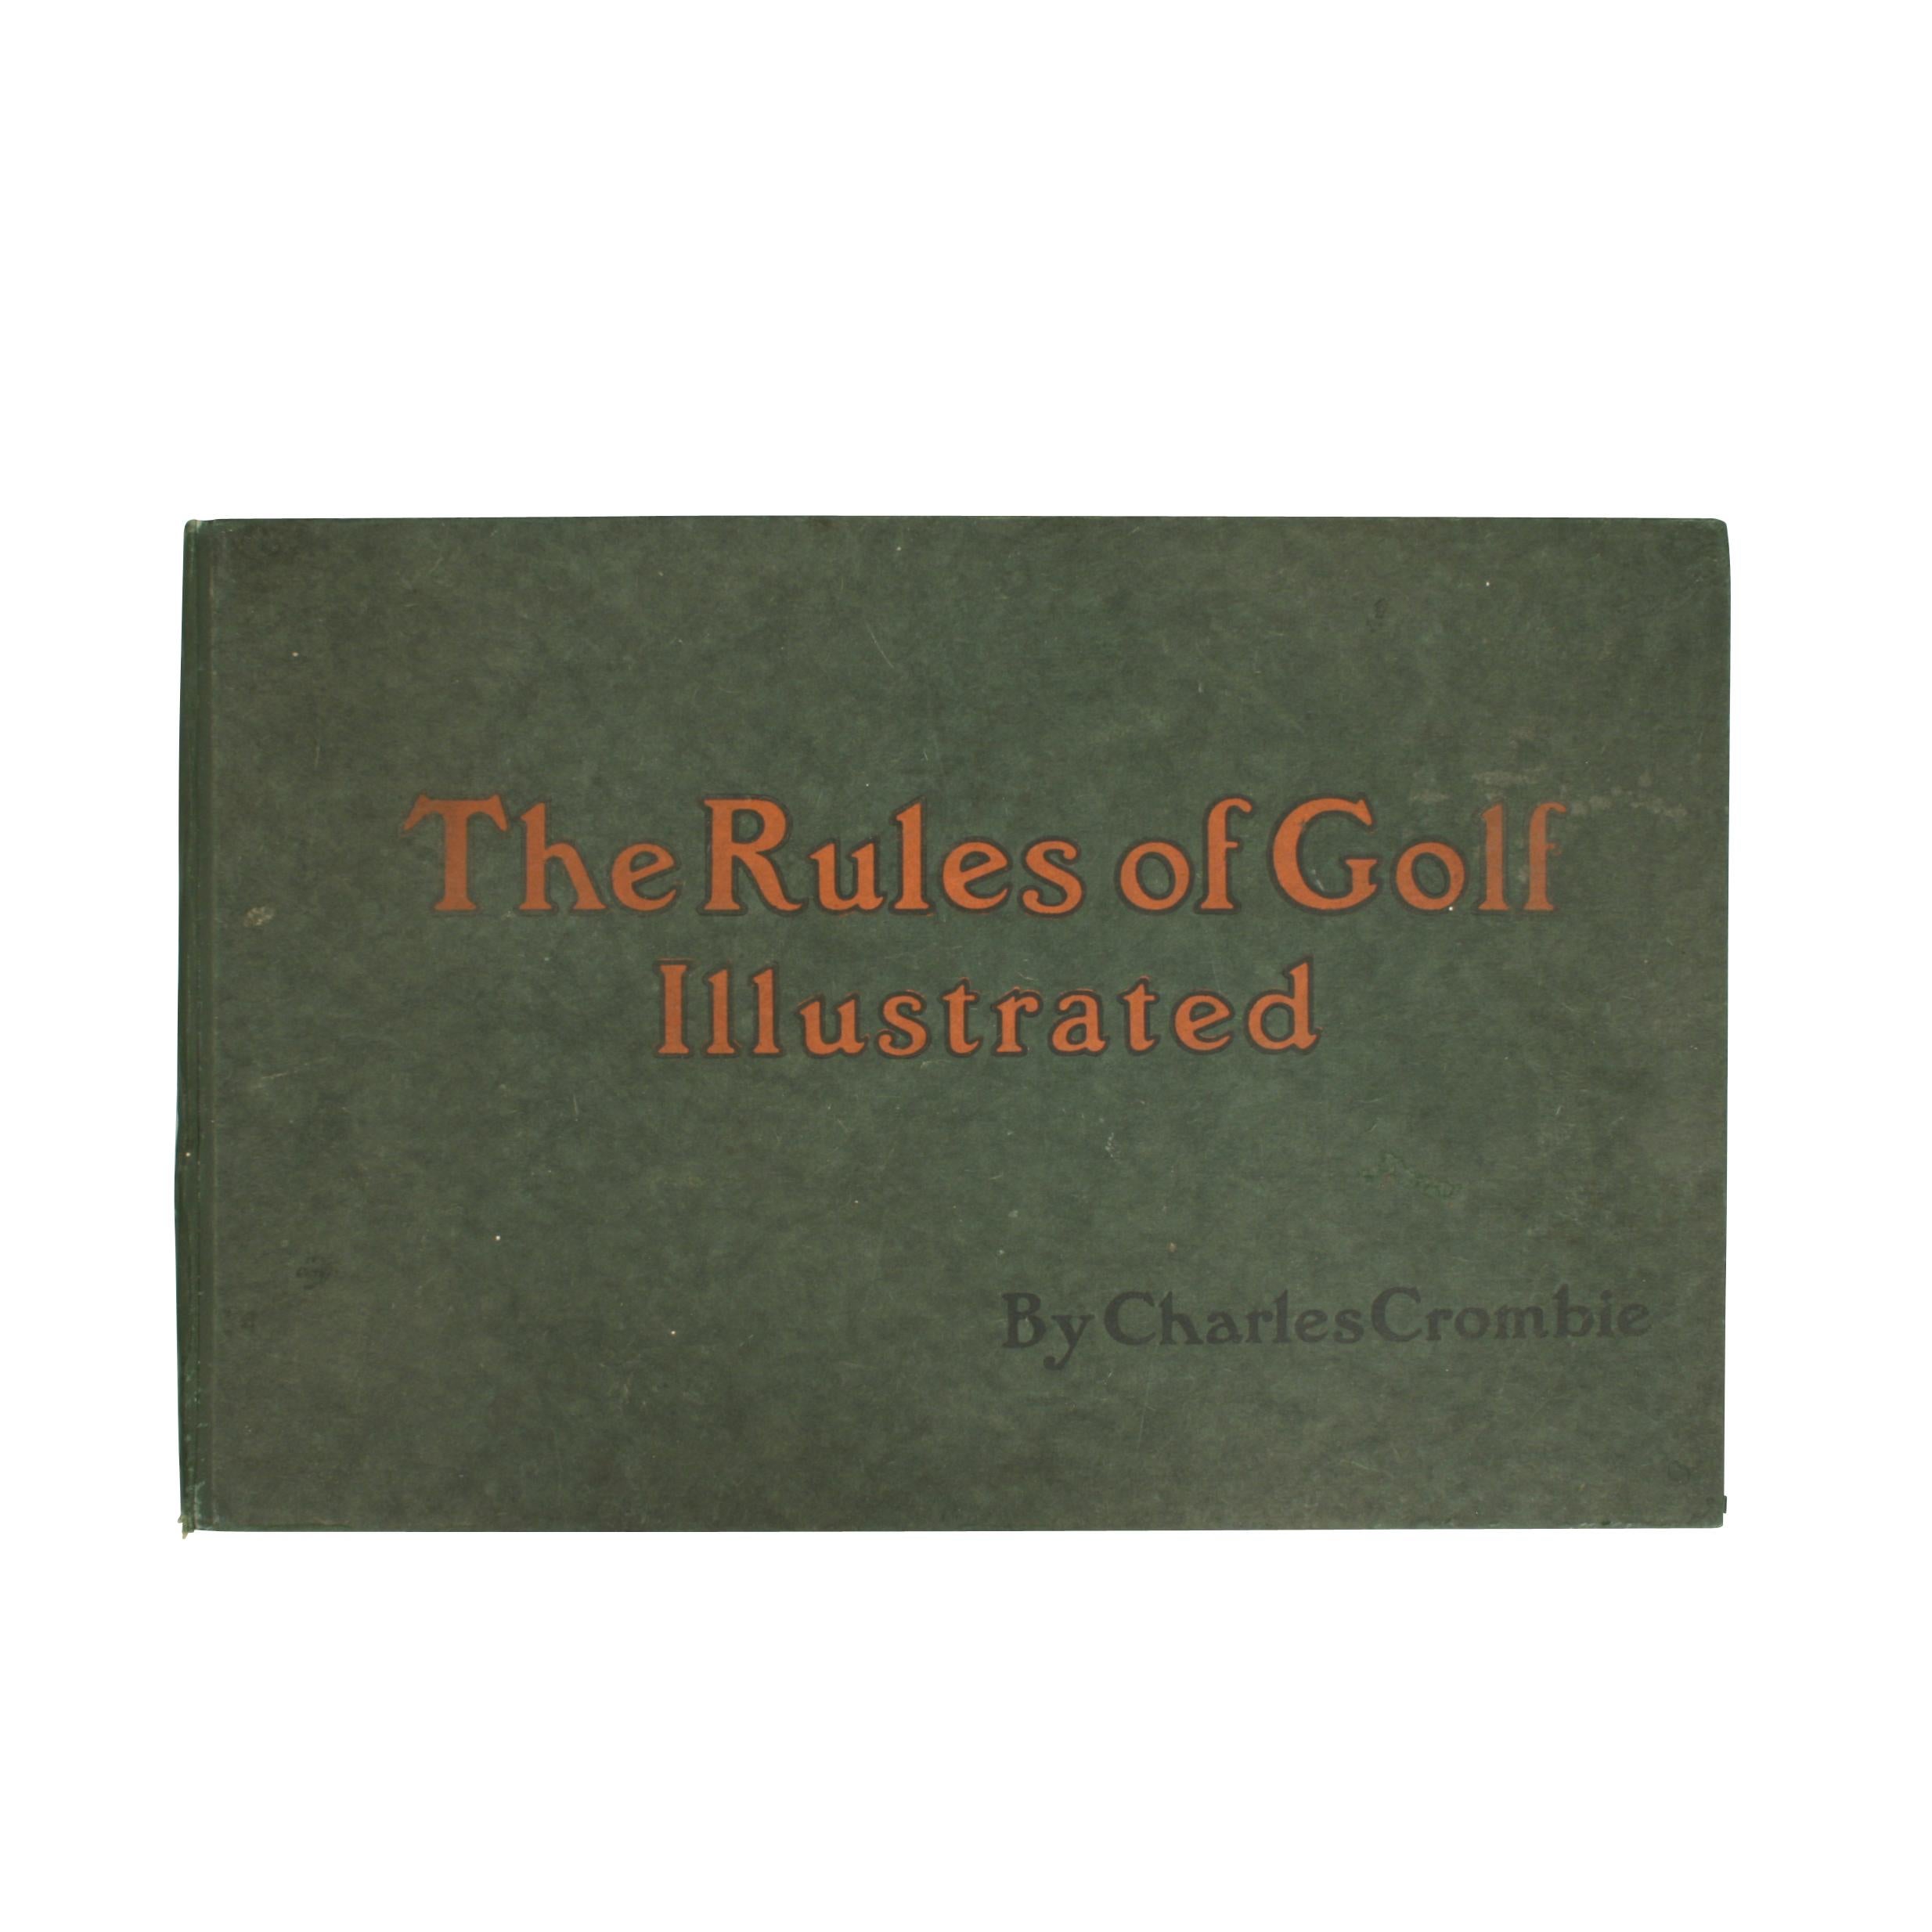 Perrier golf book, Charles Crombie Rules of Golf.
An original Perrier Rules of Golf, Illustrations by Charles Crombie. The wonderful book contains the full 24 humorous chromolithographic illustrations and are bound in the green hardback folder with